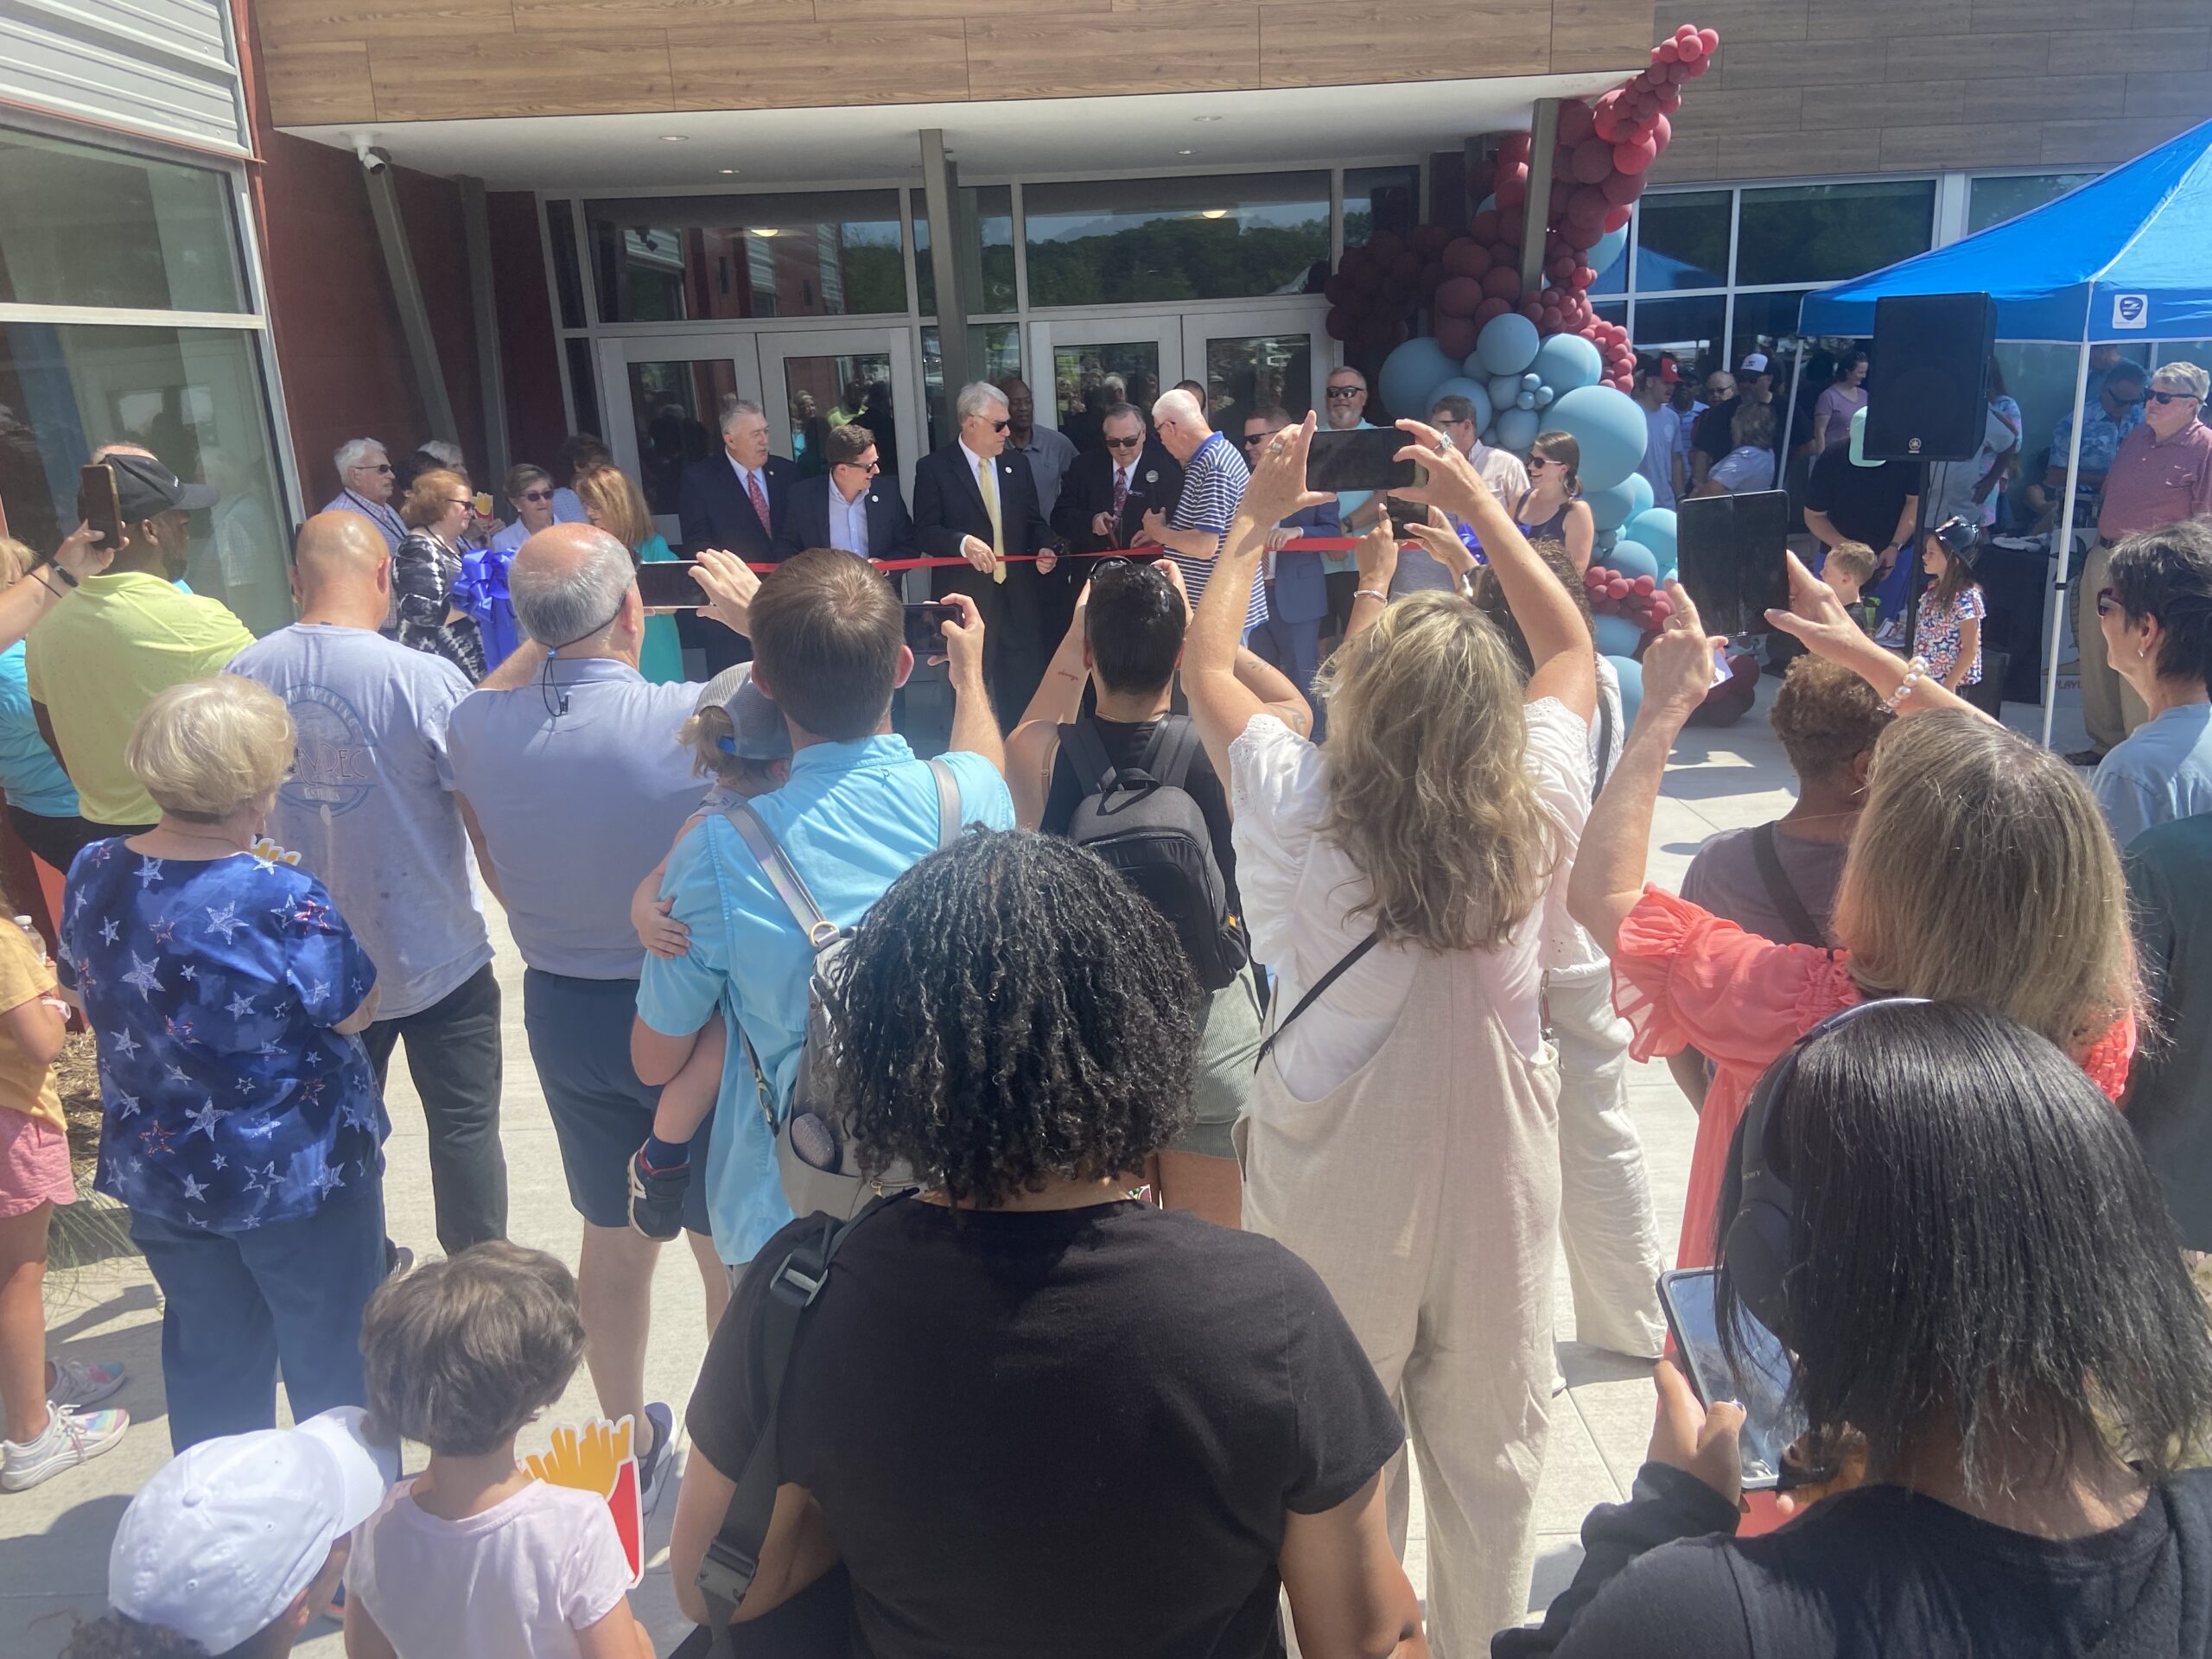 Image shows people in a crowd surrounding the entrance to the CityRec Center in Belmont, NC where there is a ribbon being cut to celebrate the grand opening.